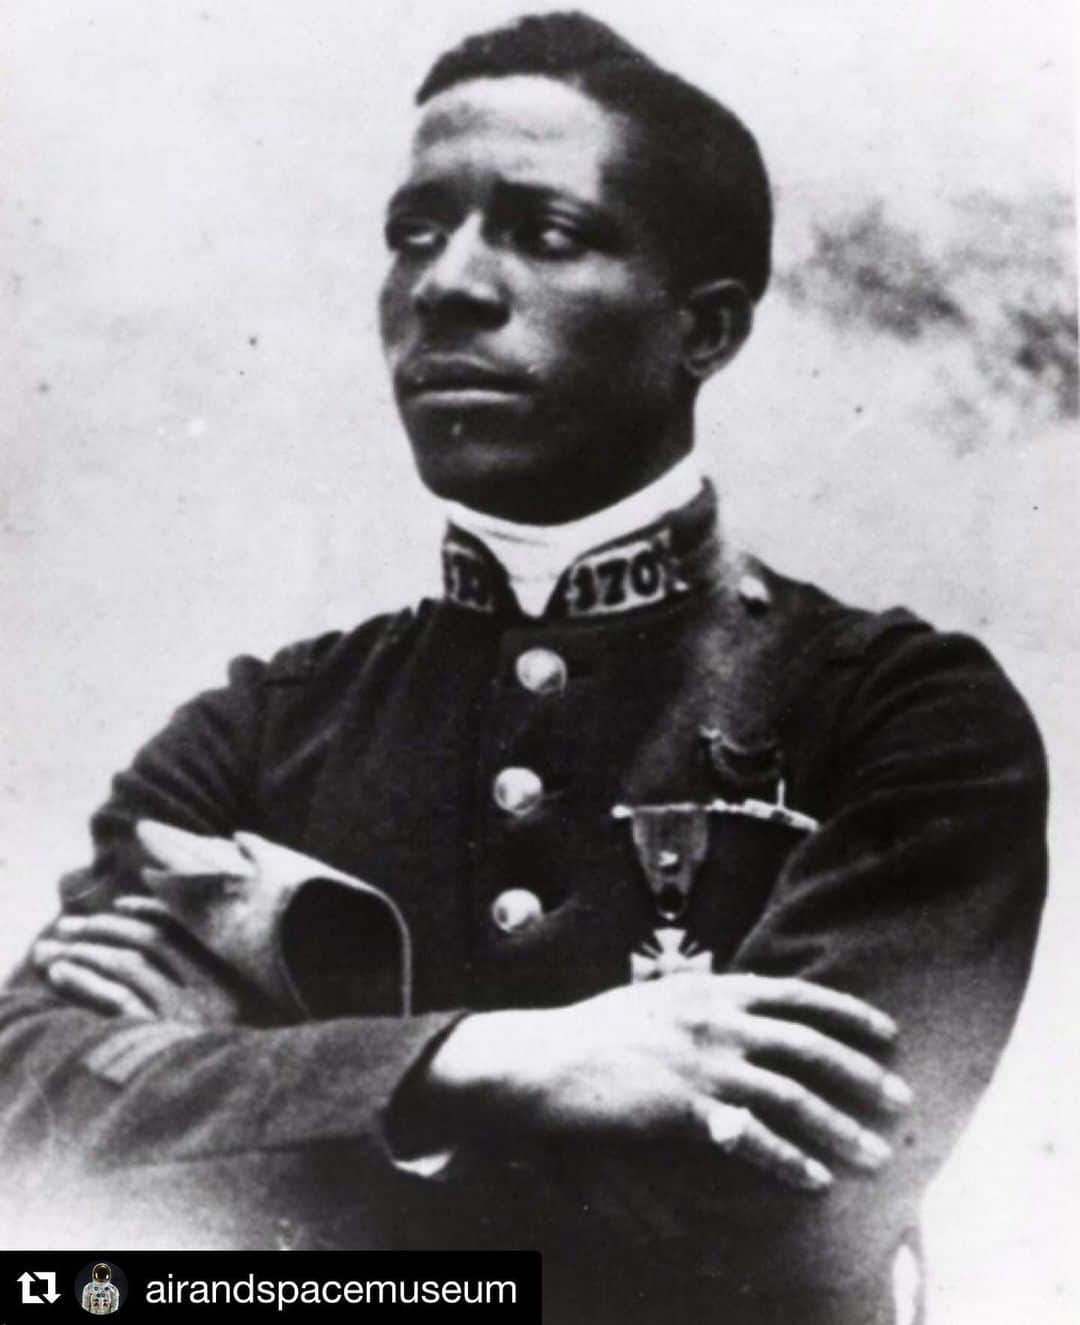 ジェフリー・ライトさんのインスタグラム写真 - (ジェフリー・ライトInstagram)「If you don’t know, now you know... #Repost @airandspacemuseum ・・・ Eugene Bullard is considered to be the first African American military pilot to fly in combat and the only African American combat pilot in World War I. Yet despite this distinction, he didn’t actually fly for the United States. He entered the French Aéronautique Militaire in November 1916 and later tried to join the U.S. Air Service when the U.S. entered the war in 1917, but was rejected due to racial prejudices. The official reason he was not accepted was because he was an enlisted man, and the Air Service required pilots to be officers and hold at least the rank of First Lieutenant but in actuality, he was likely rejected because of his race. Bullard returned France to fight with the Aéronautique Militaire and then the French Foreign Legion.  After the war Bullard remained in France until the 1940s when he fled France, fearing capture from Nazis due to his espionage activities against them. He eventually made his way to the United States, settling in the Harlem district of New York City. After his arrival in New York, Bullard worked as a security guard and longshoreman. In the post-World War II years, Bullard took up the cause of civil rights. In the summer of 1949, he was involved in an altercation with the police and a racist mob at a Paul Robeson concert in Peekskill, New York, in which he was beaten by police. Another incident involved a bus driver who ordered Bullard to sit the back of his bus. These events left Bullard deeply disillusioned with the United States, and he returned to France. During his lifetime, the French showered Bullard with honors, and in 1954, he was one of three men chosen to relight the everlasting flame at the Tomb of the Unknown Soldier in Paris. In October 1959 he was made a knight of the Legion of Honor, the highest ranking order and decoration bestowed by France. It was the fifteenth decoration given to him by the French government. #BlackHistory #AfricanAmericanHistory #WorldWarI #WWI #WWIHistory #worldwarihistory」6月14日 9時55分 - jfreewright